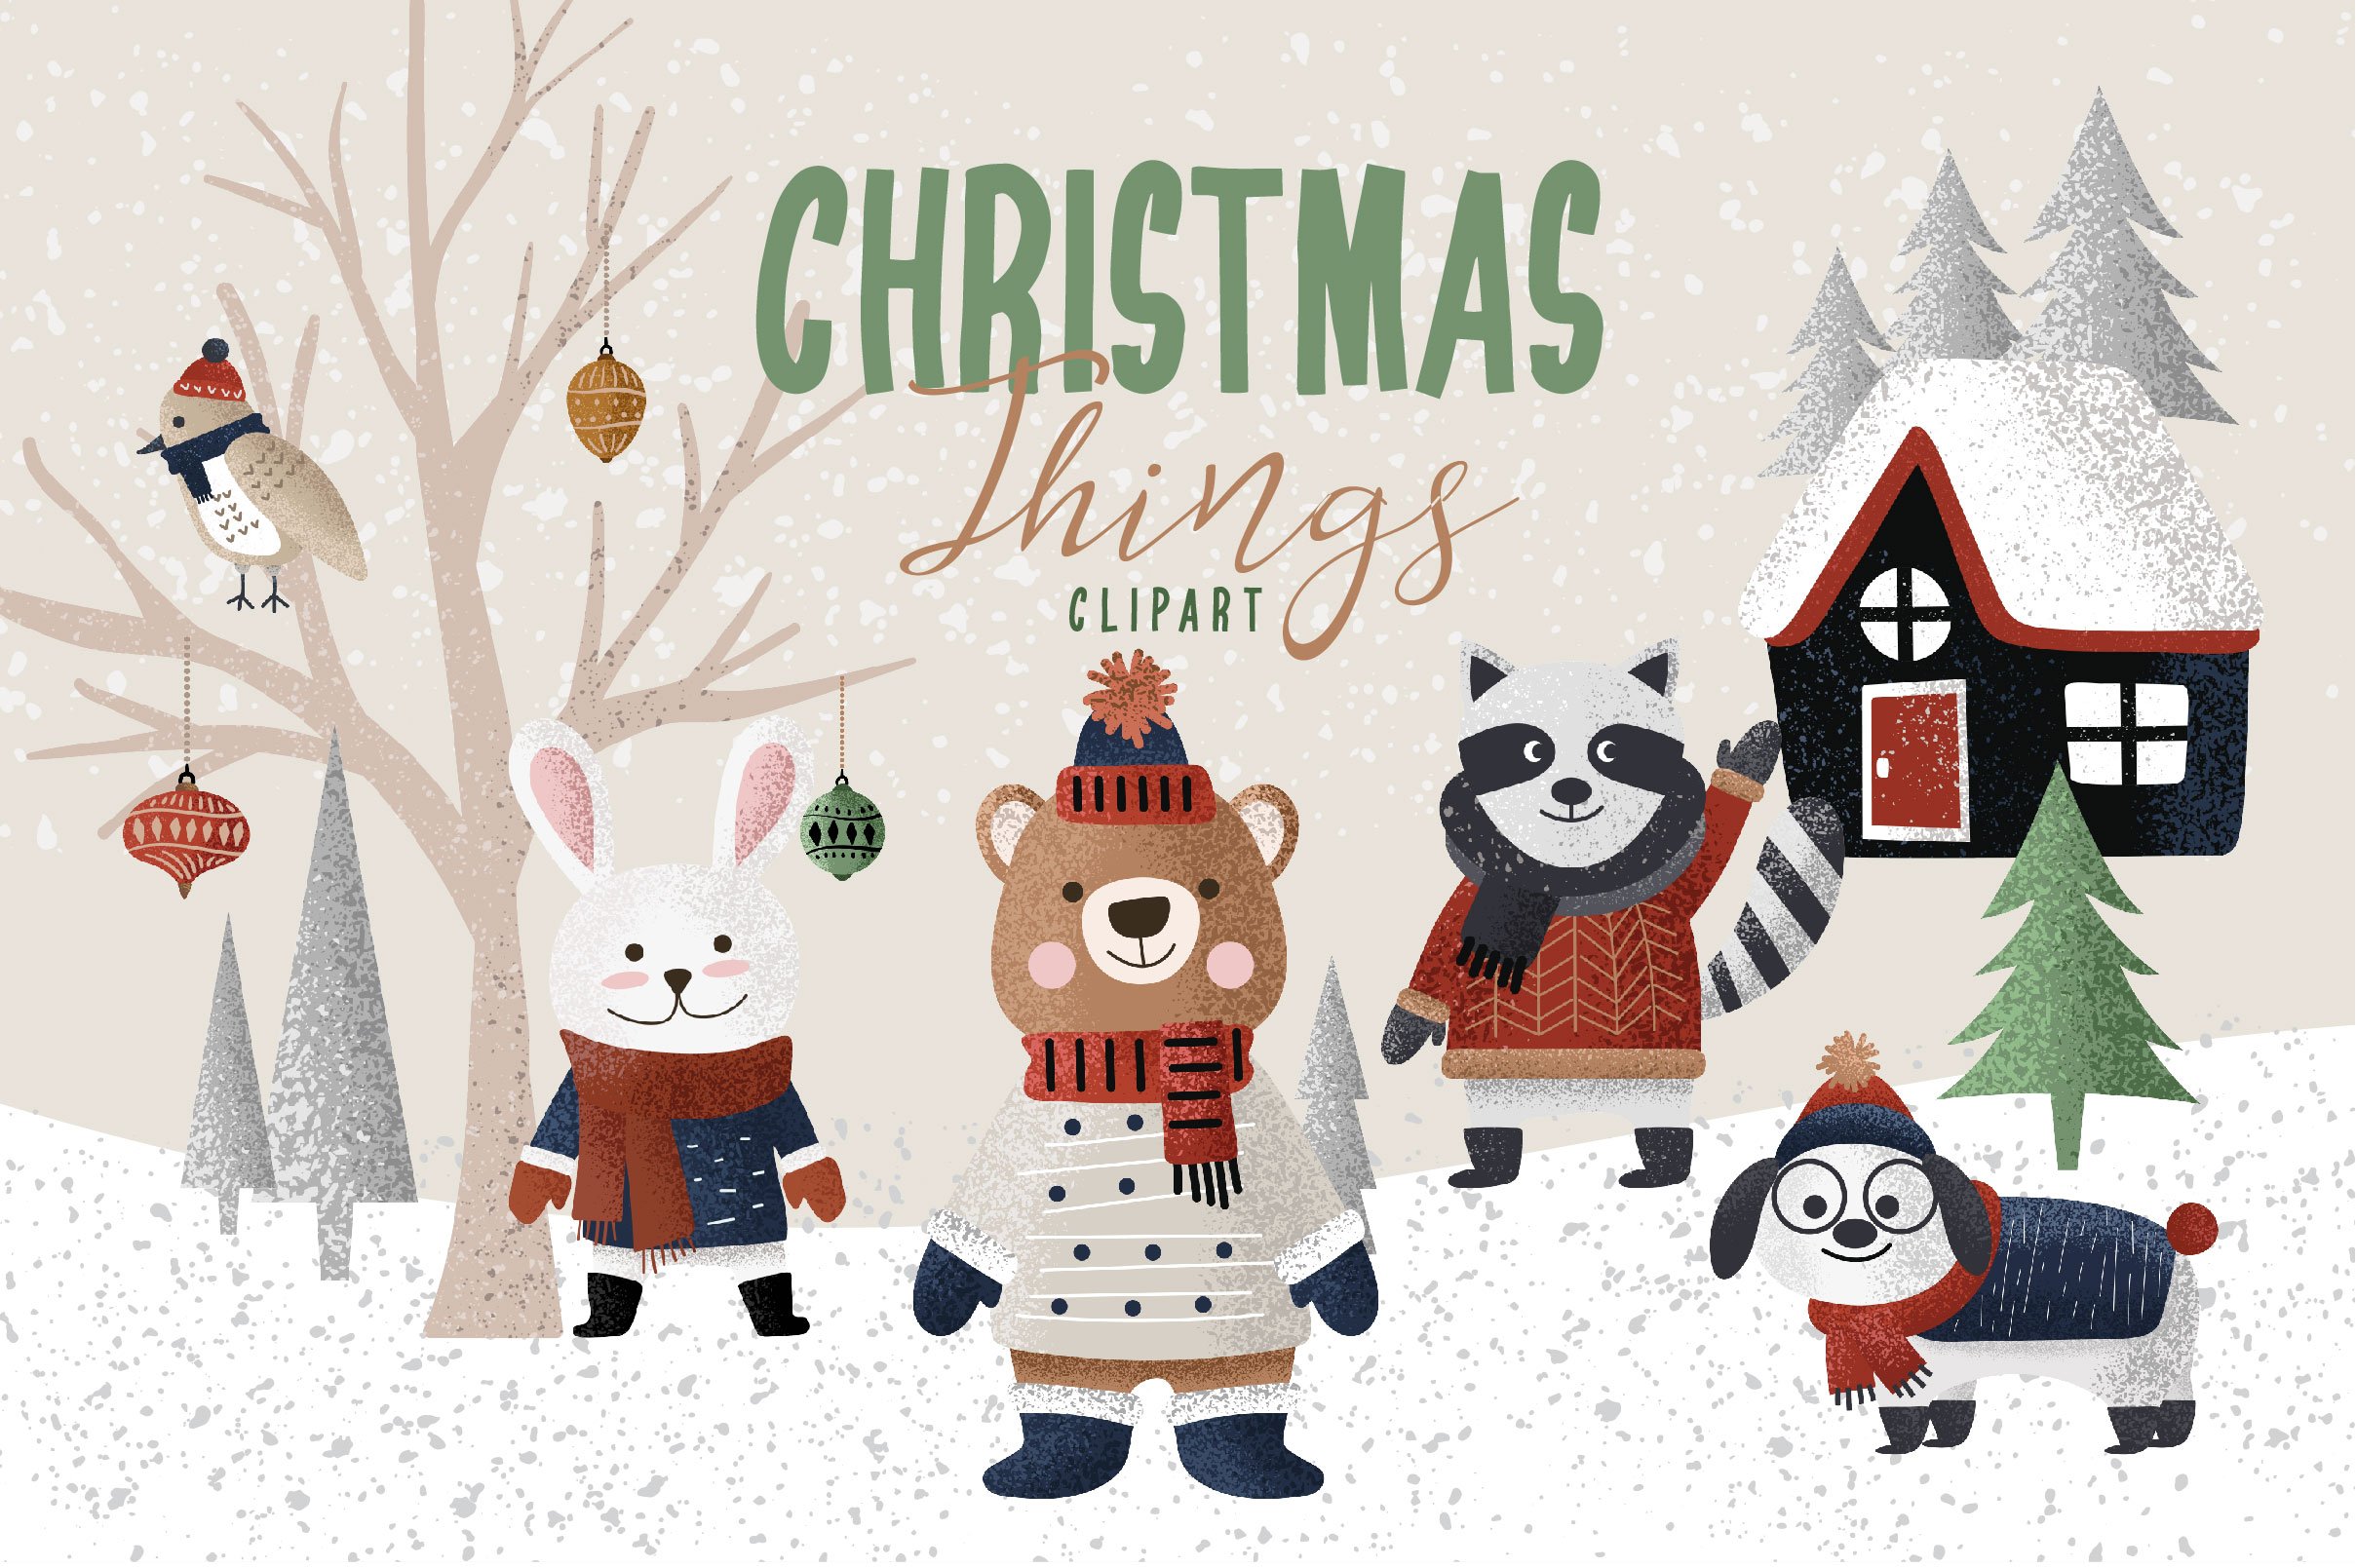 Christmas Things Clipart cover image.